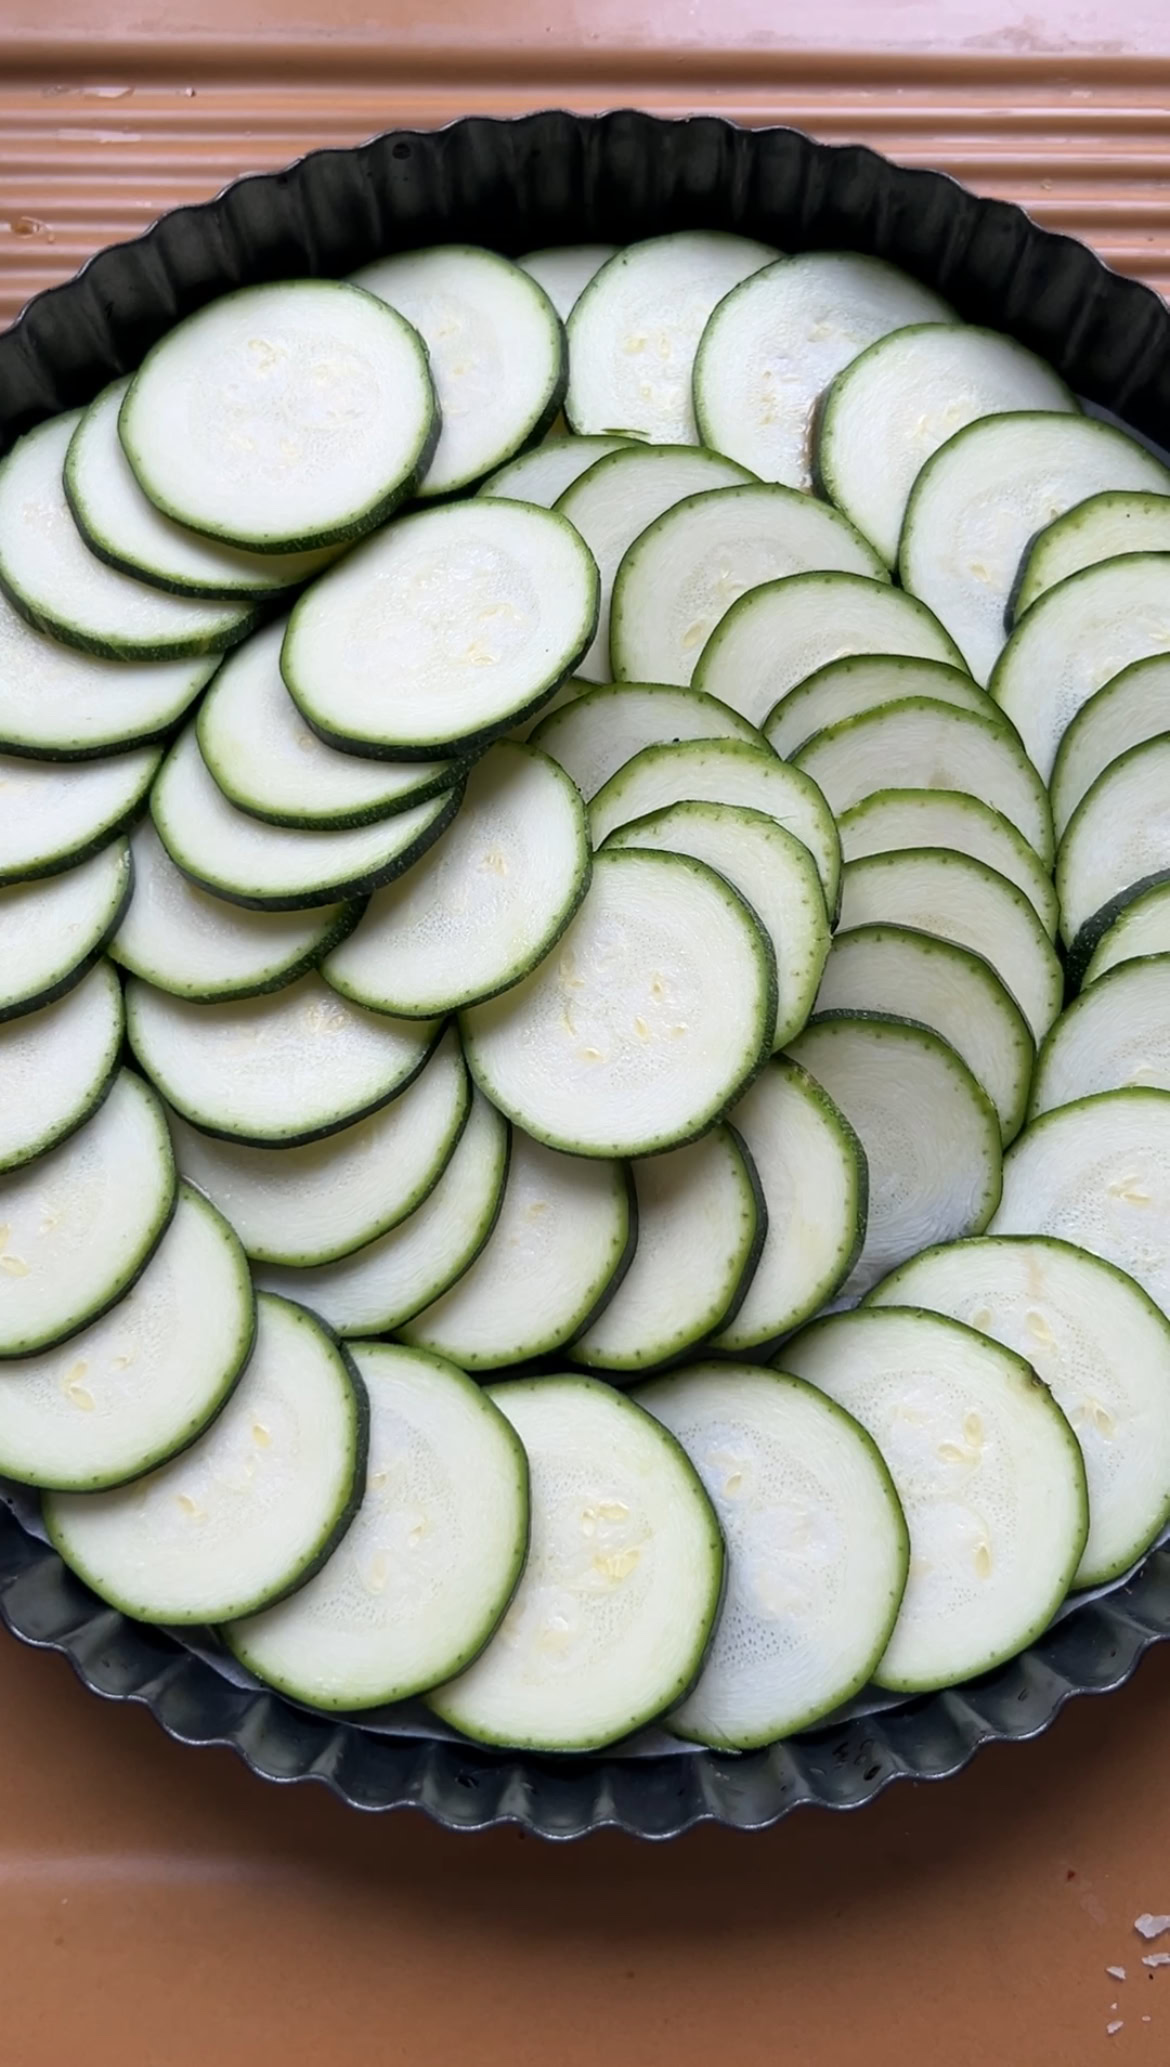 Slices of zucchini nicely arranged in the bottom of the tart tin.